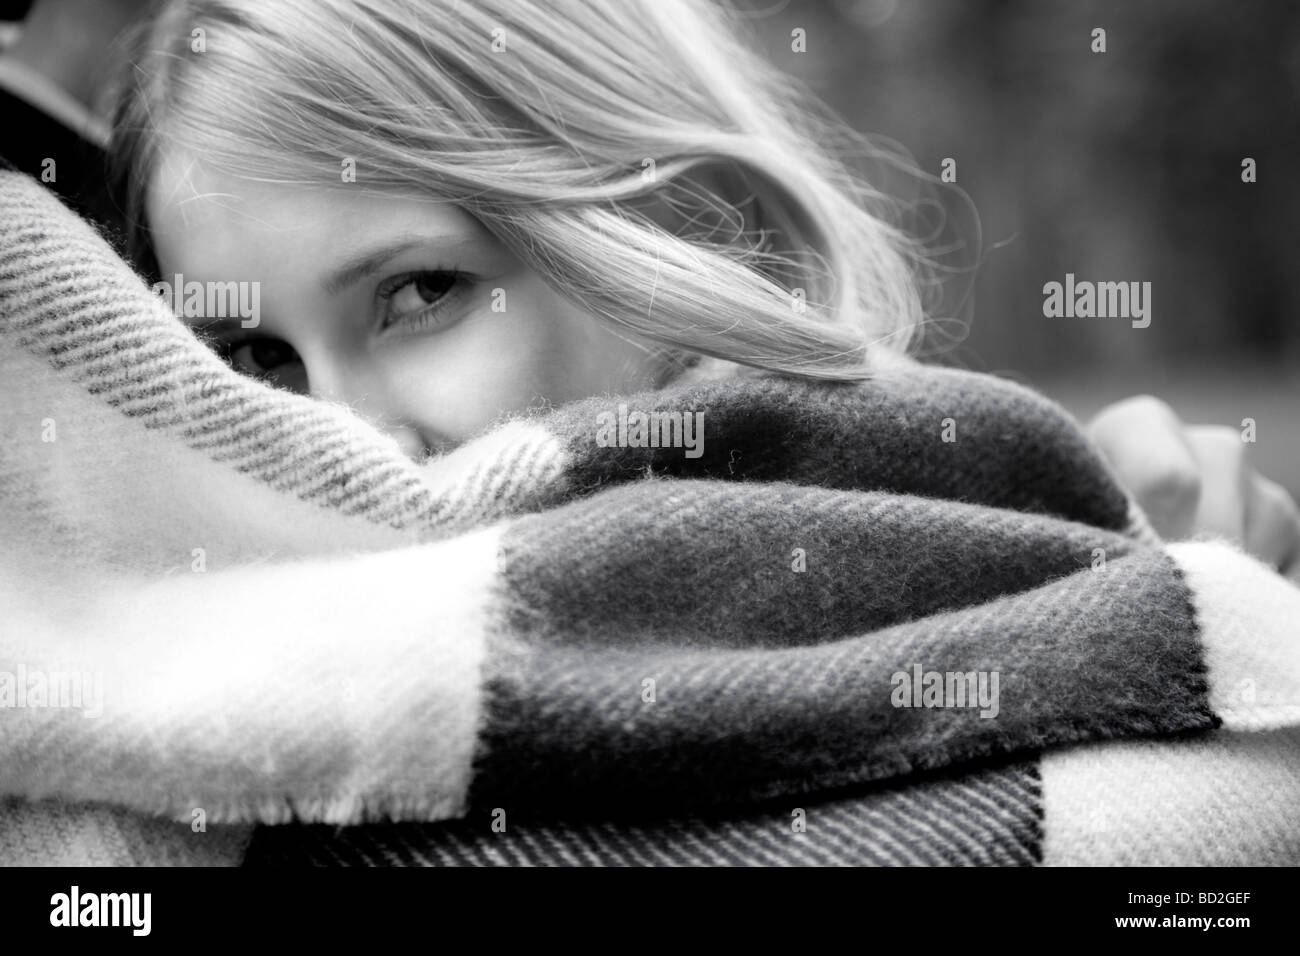 Couple wrapped in blanket Stock Photo